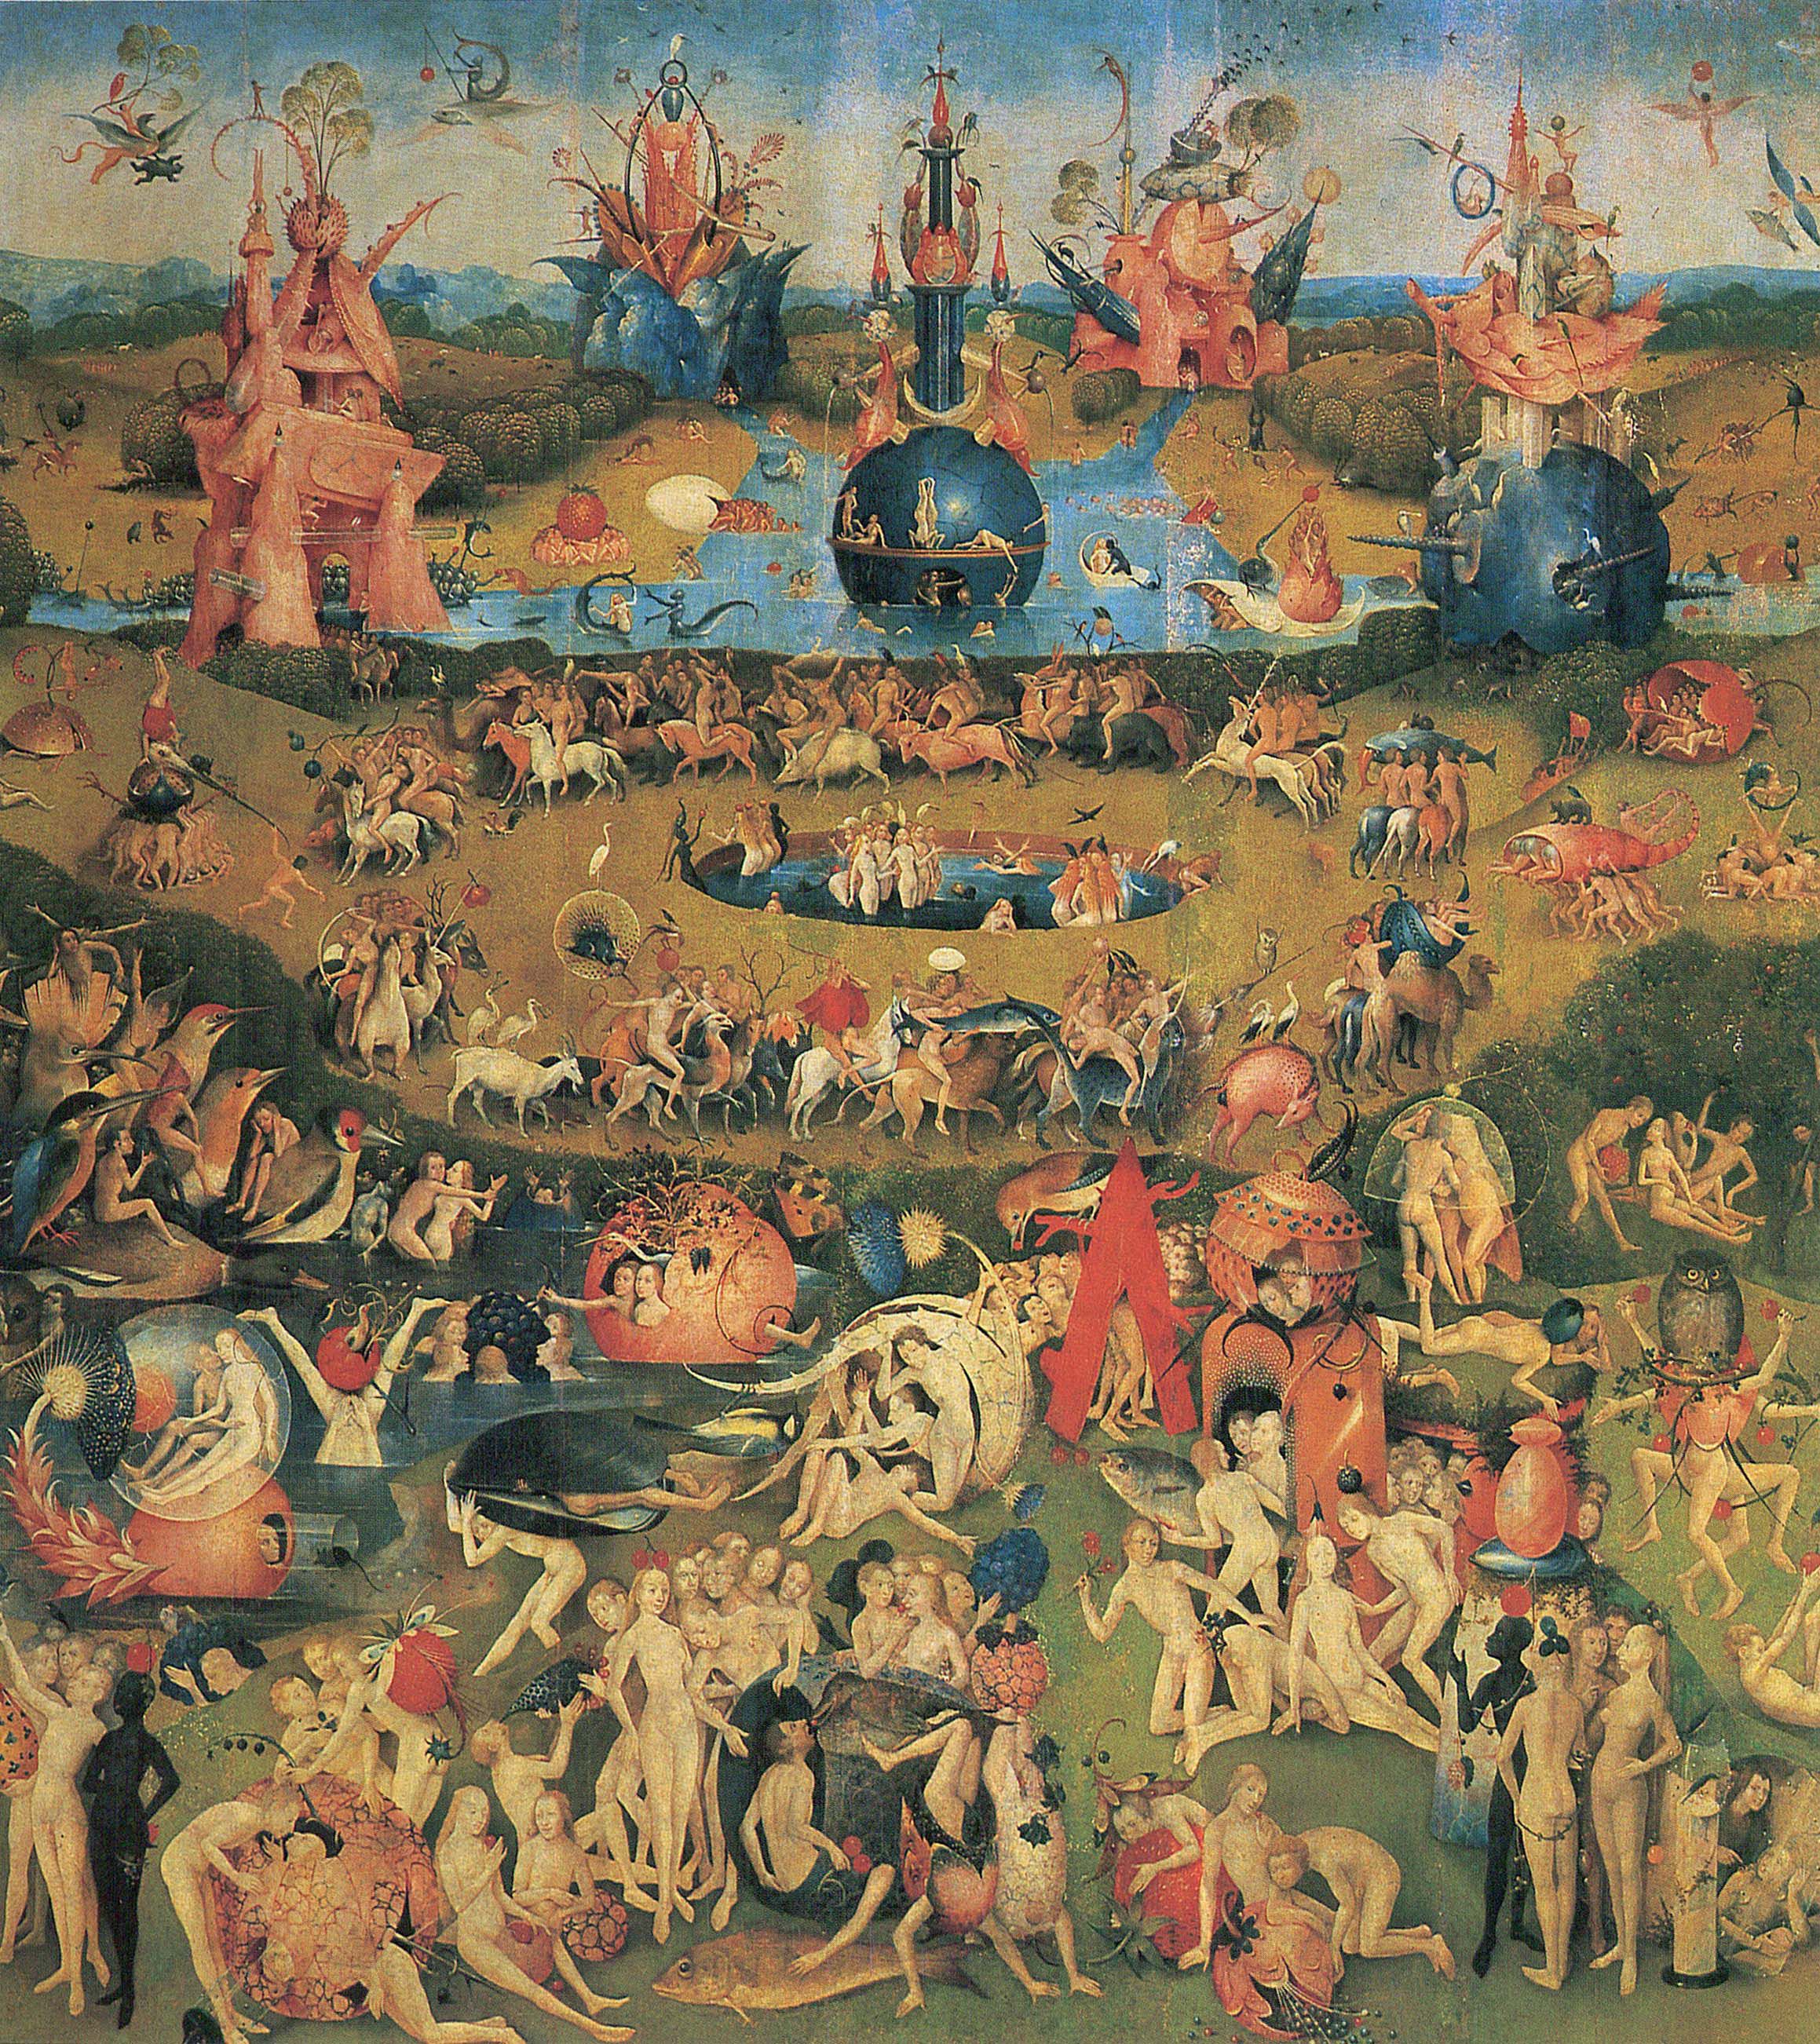 hieronymus bosch the complete paintings and drawings